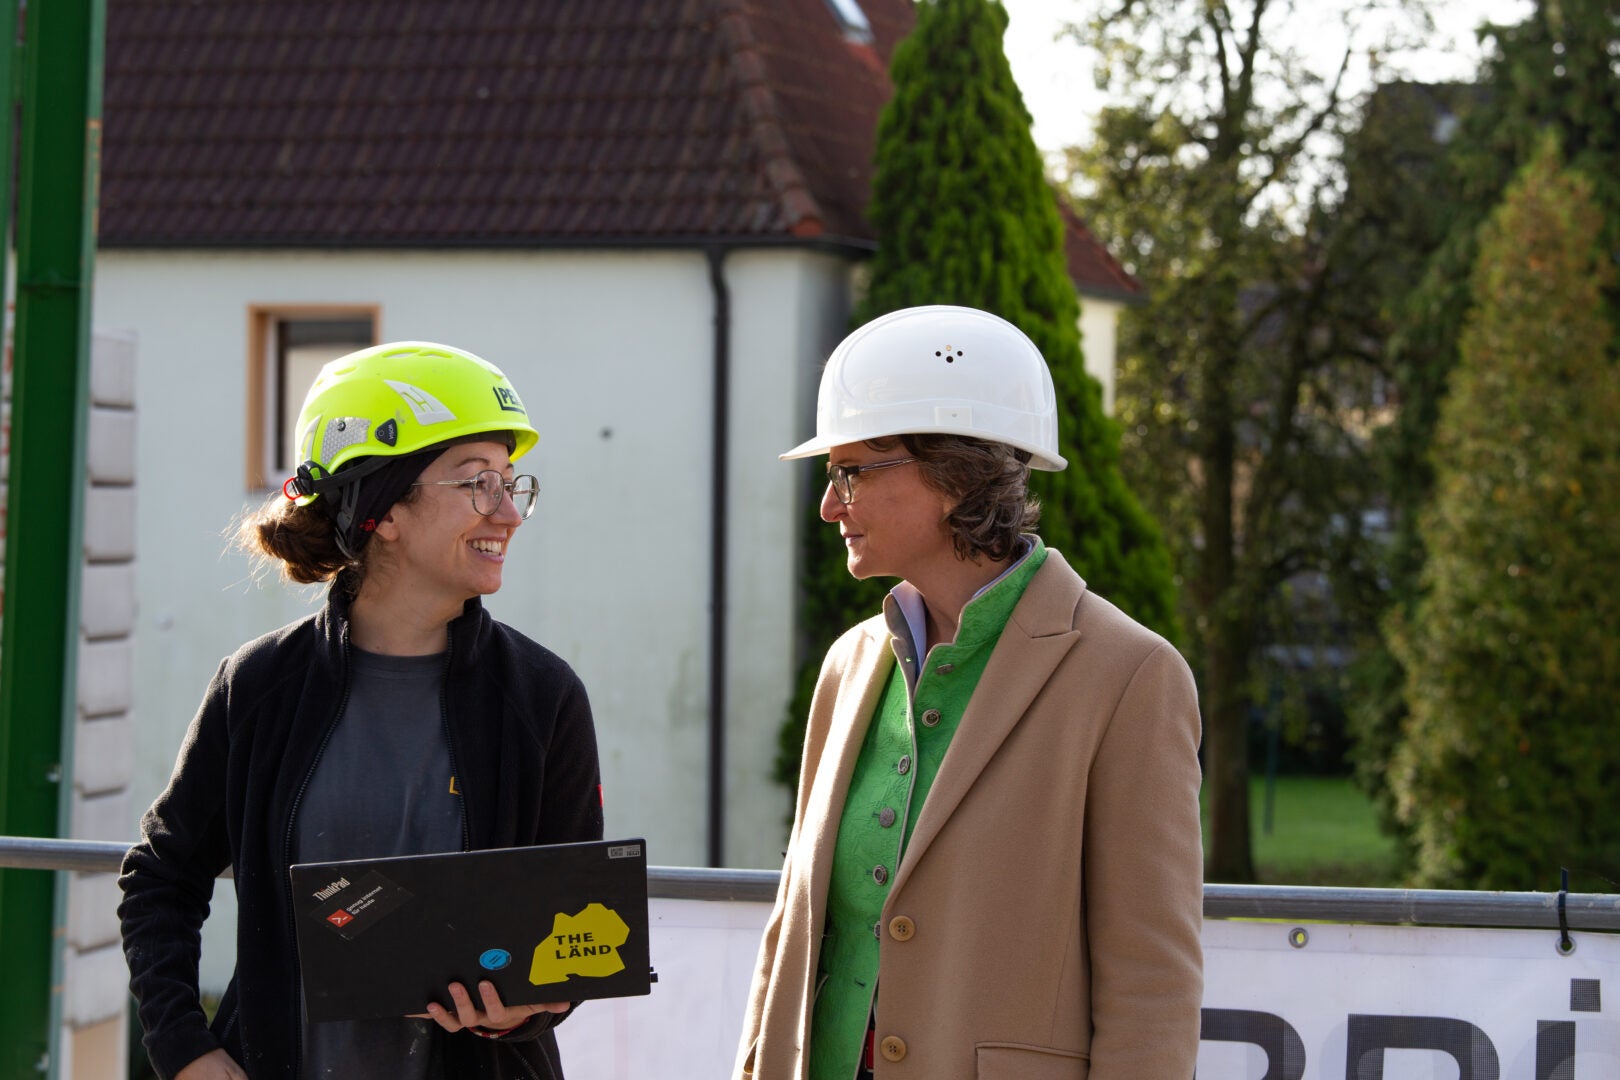 Minister Ina Scharrenbach on the construction site of the Europe's first 3D printed social housing project